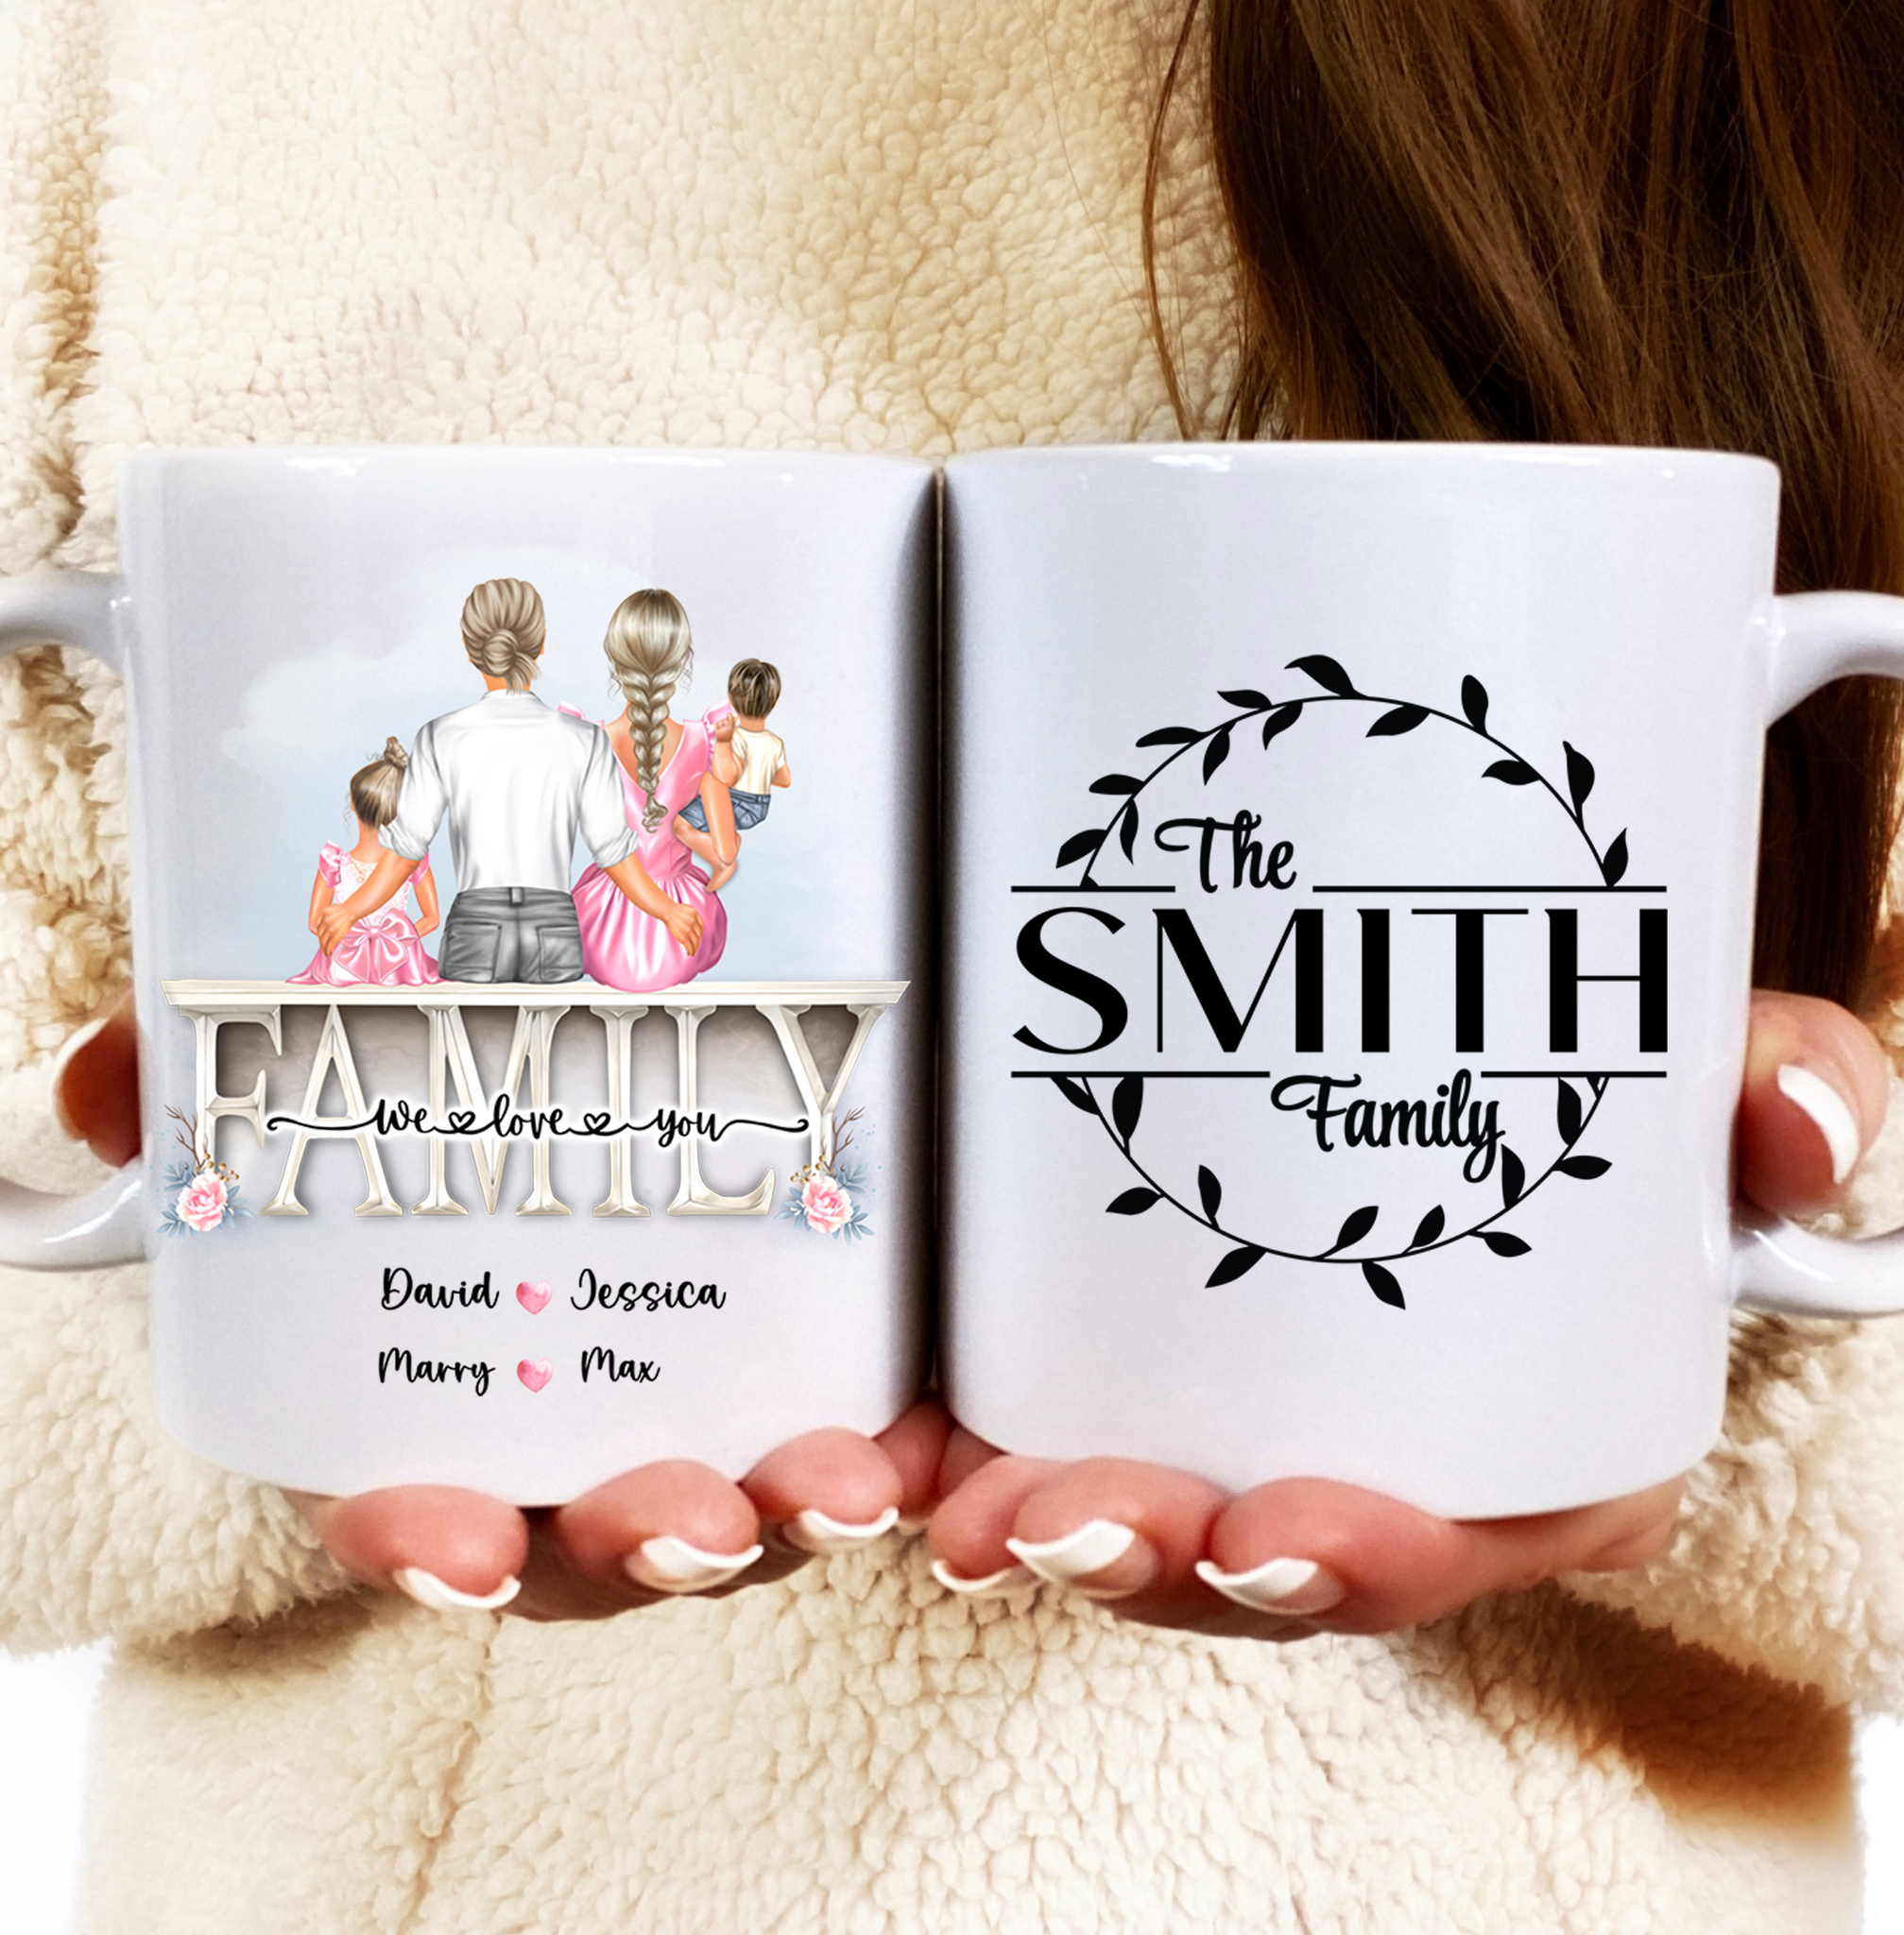 Family with Kids - We Love You- Personalized Mug